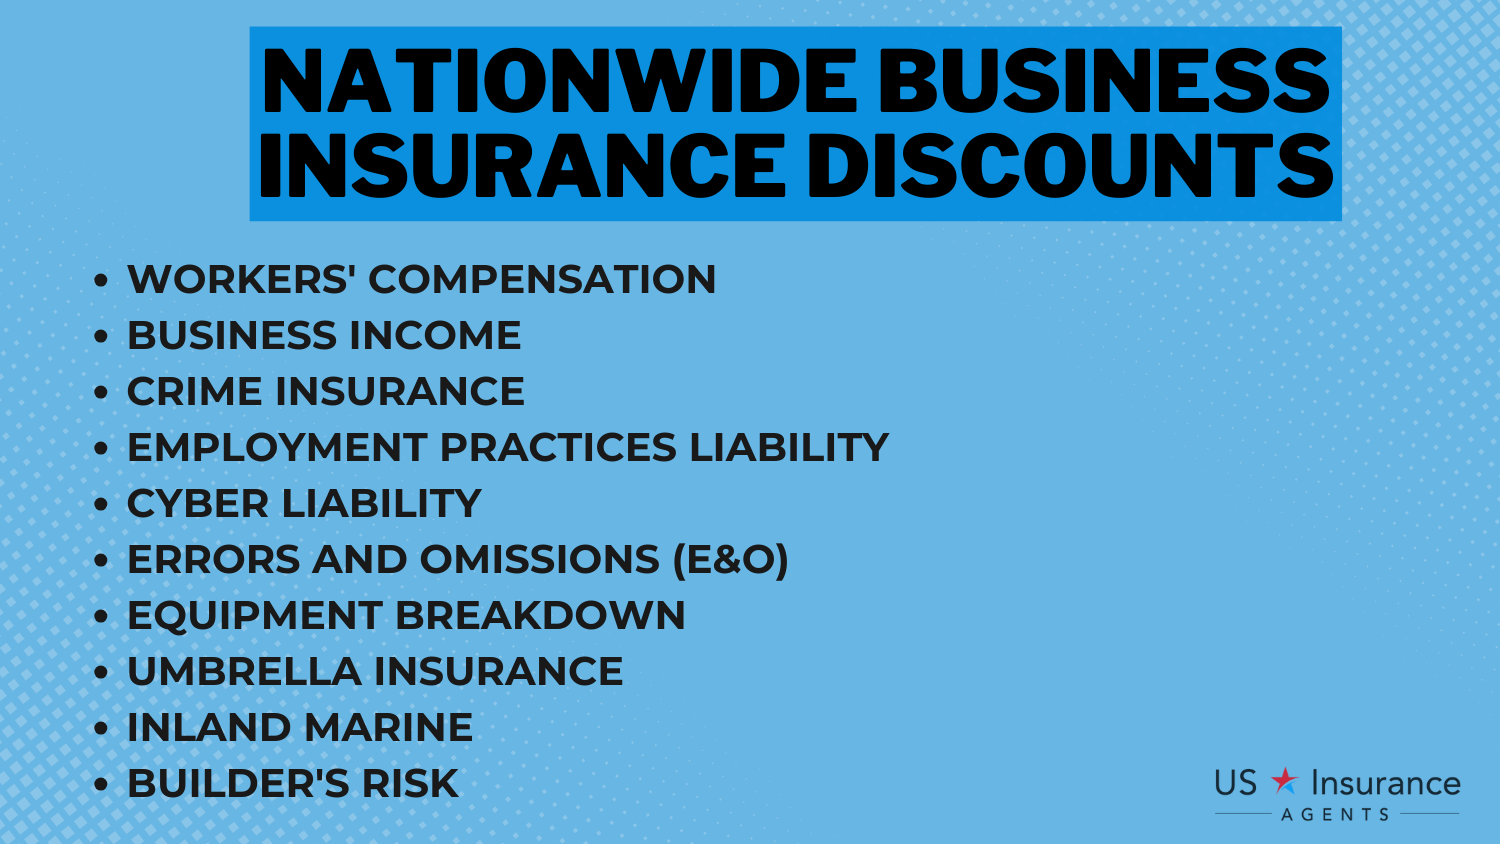 Nationwide Business Insurance Discounts: Best Business Insurance for Call Centers